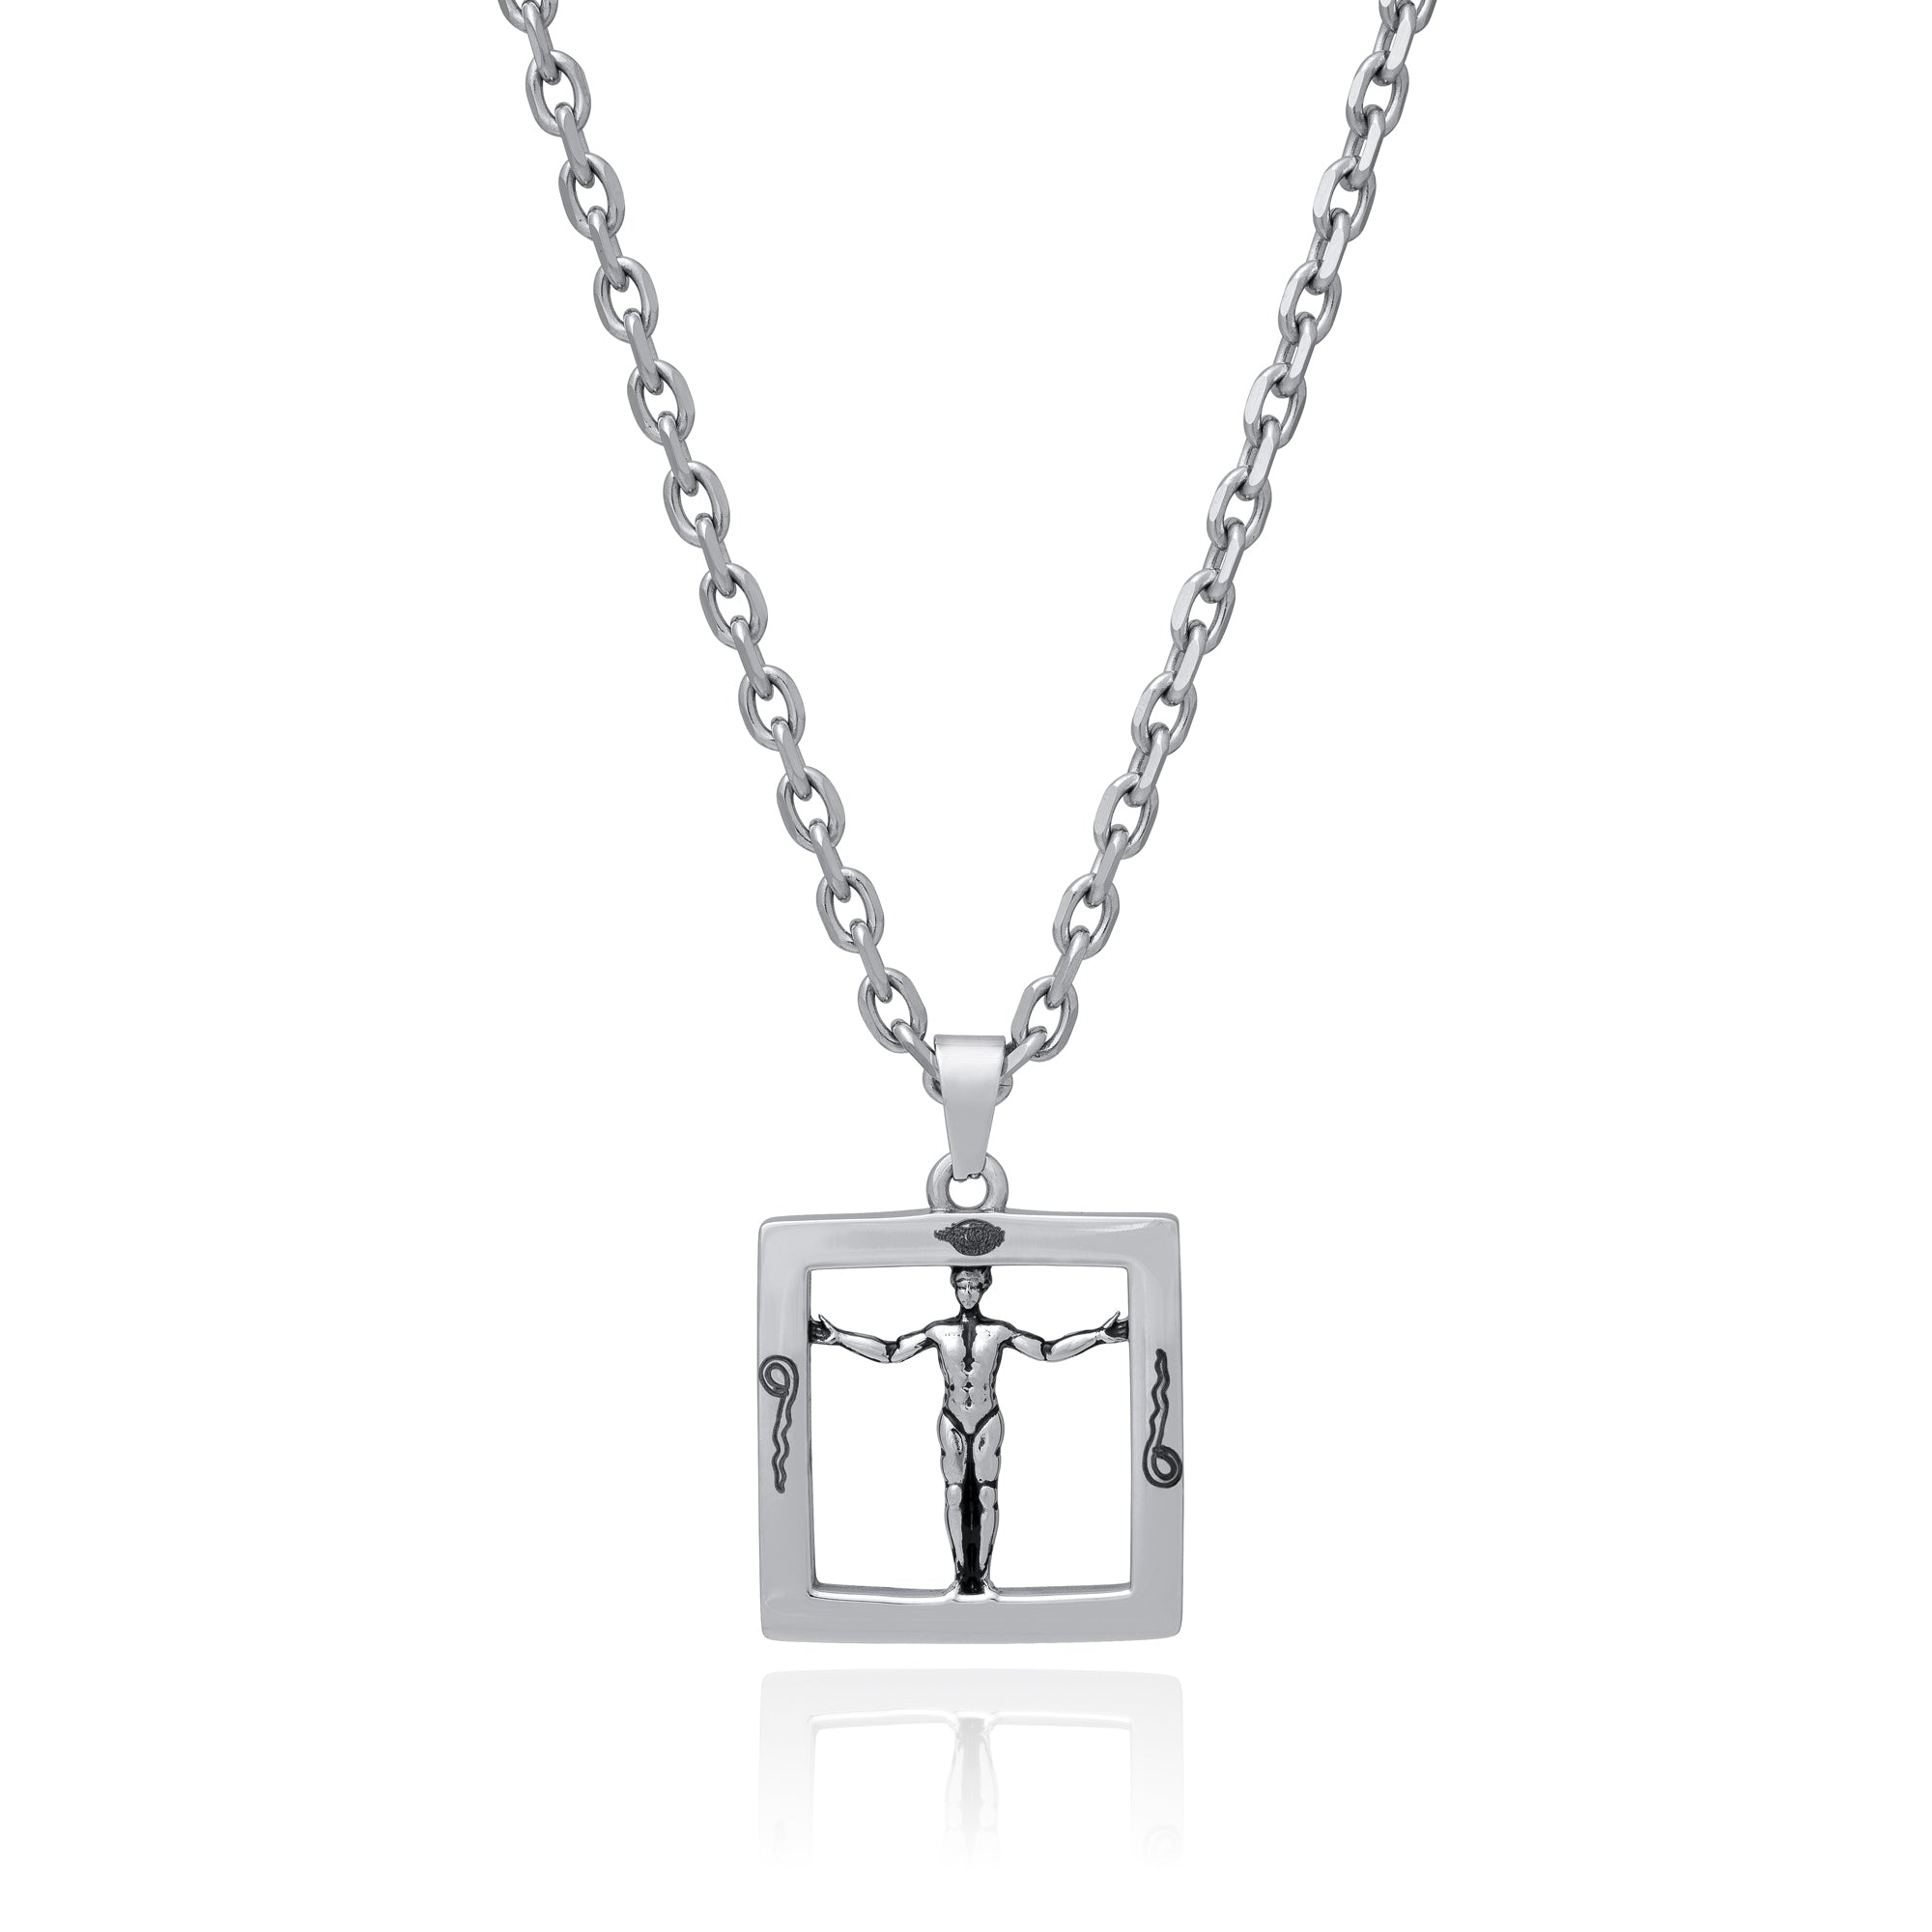 Engraved silver charm pendant on chain